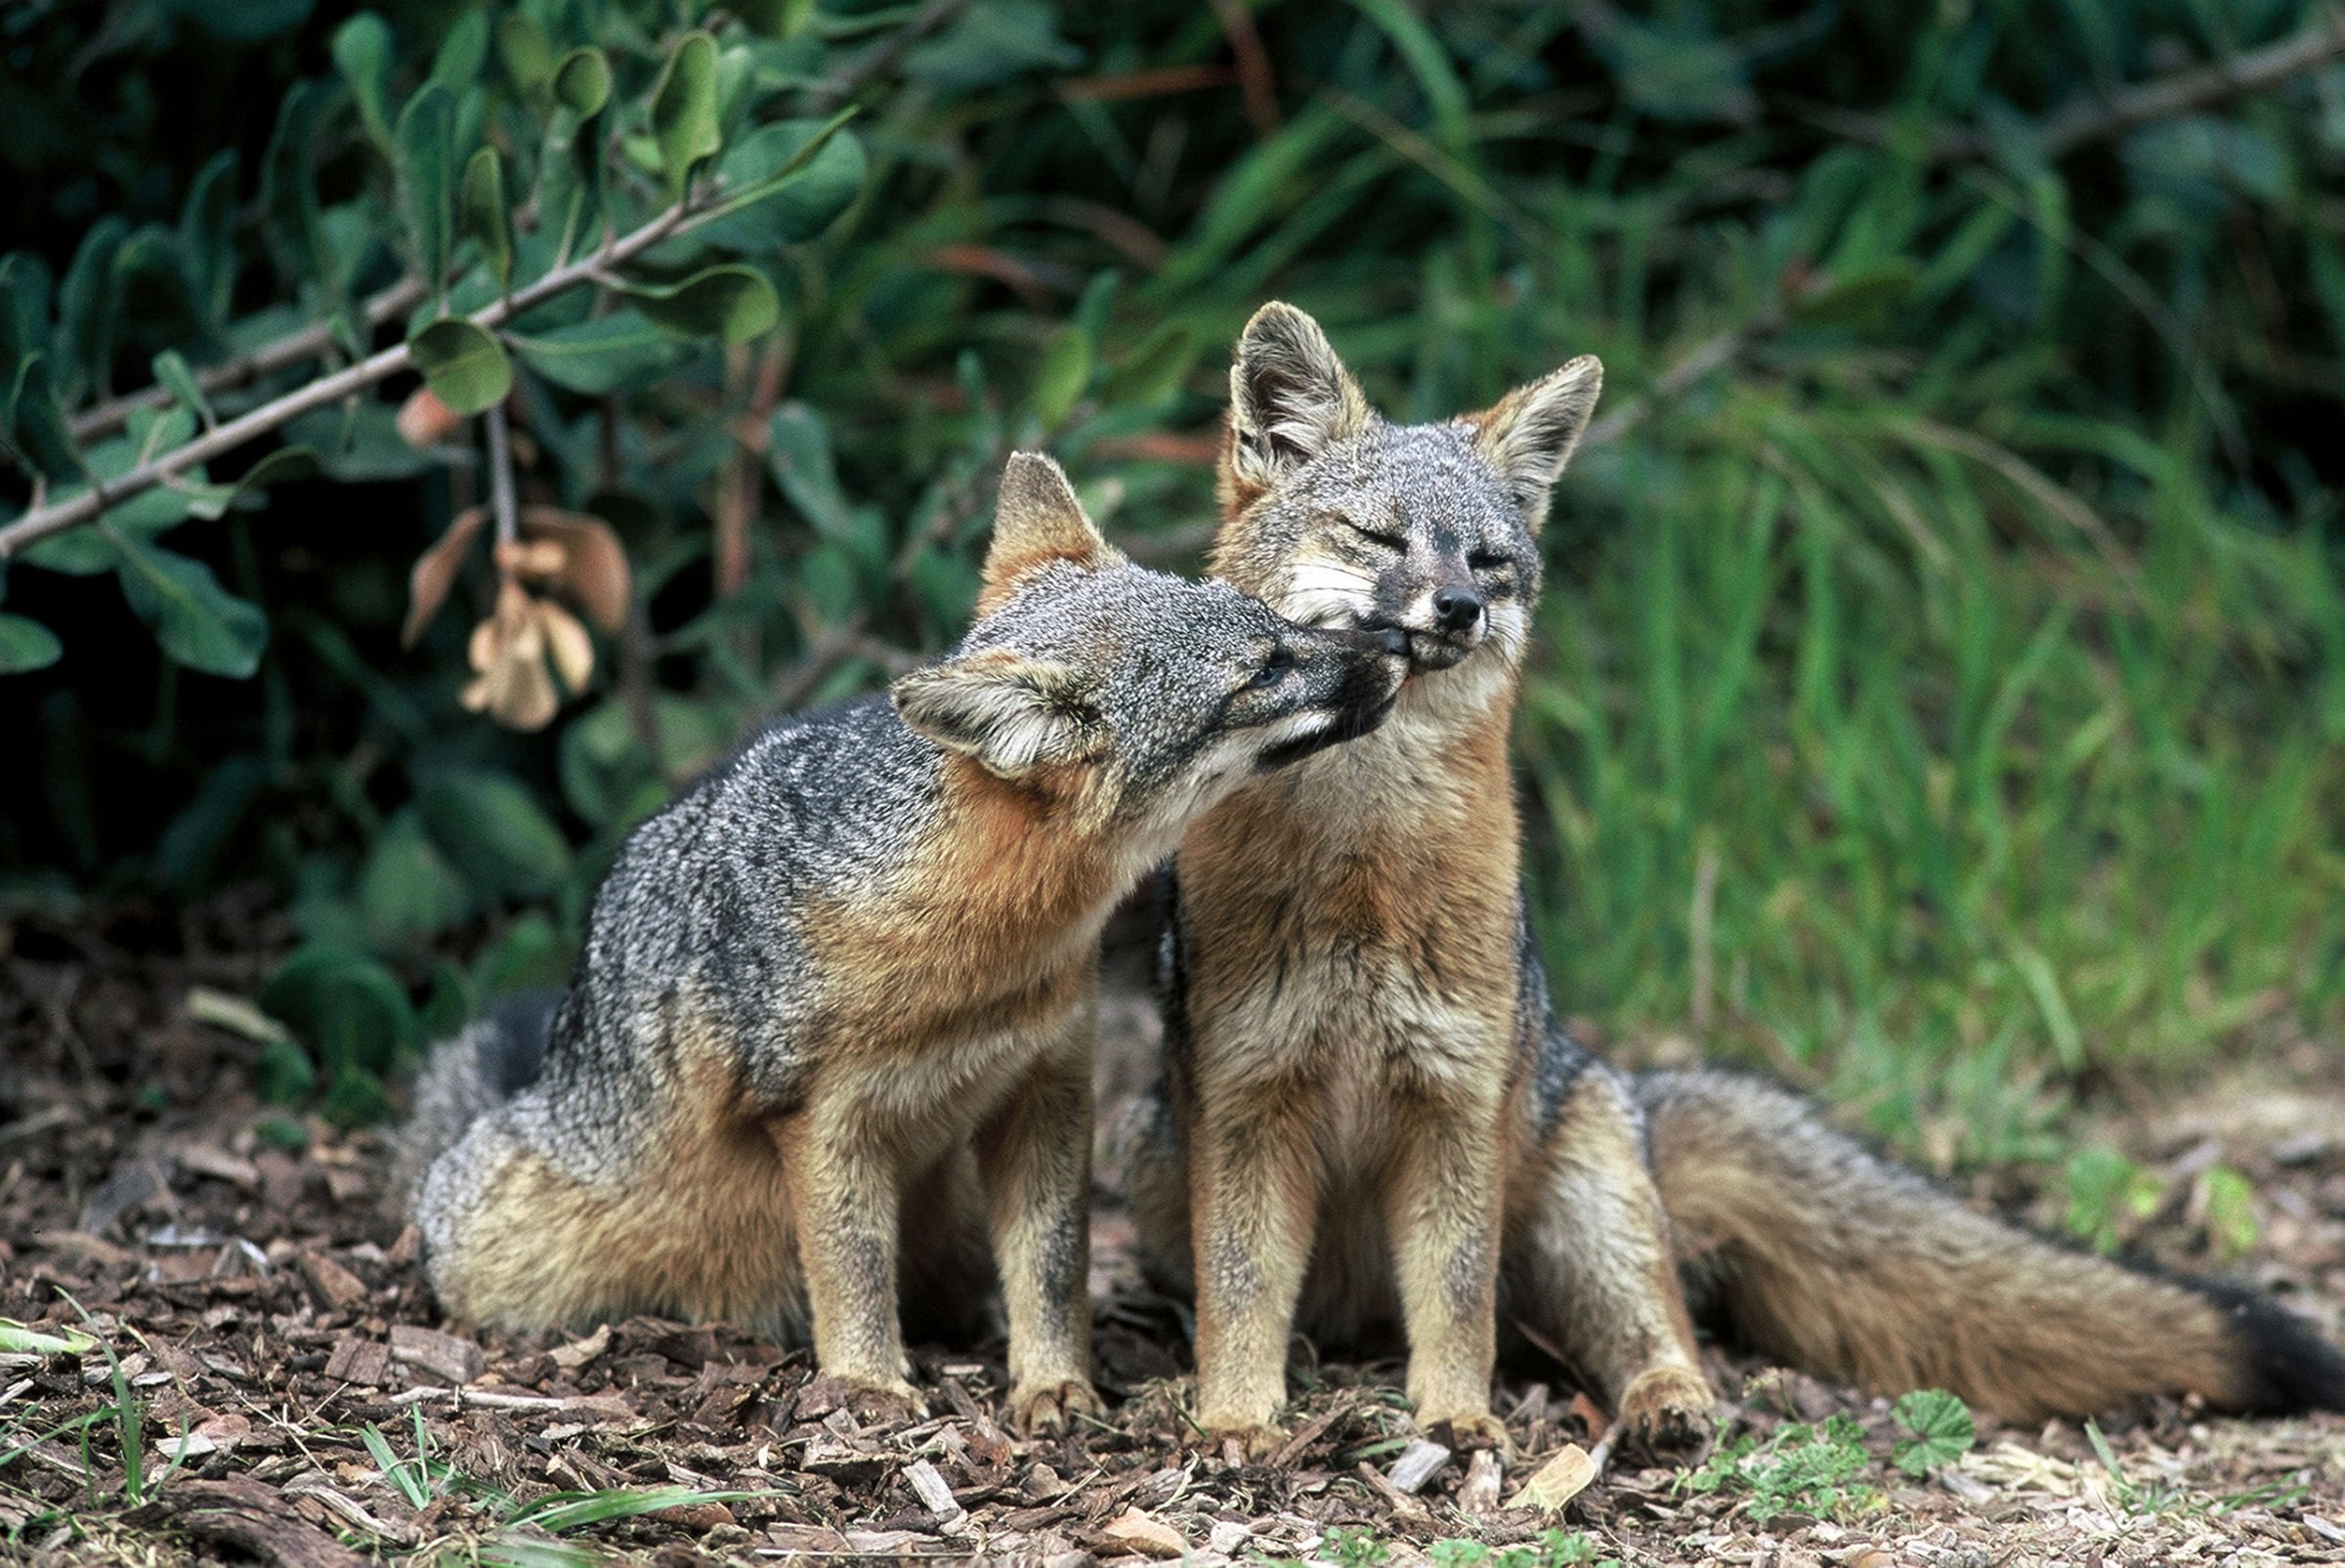 Two island foxes in Channel Islands National Park, Calif. Three fox subspecies native to California's Channel Islands were removed from the list of endangered species, Aug. 11, 2016.